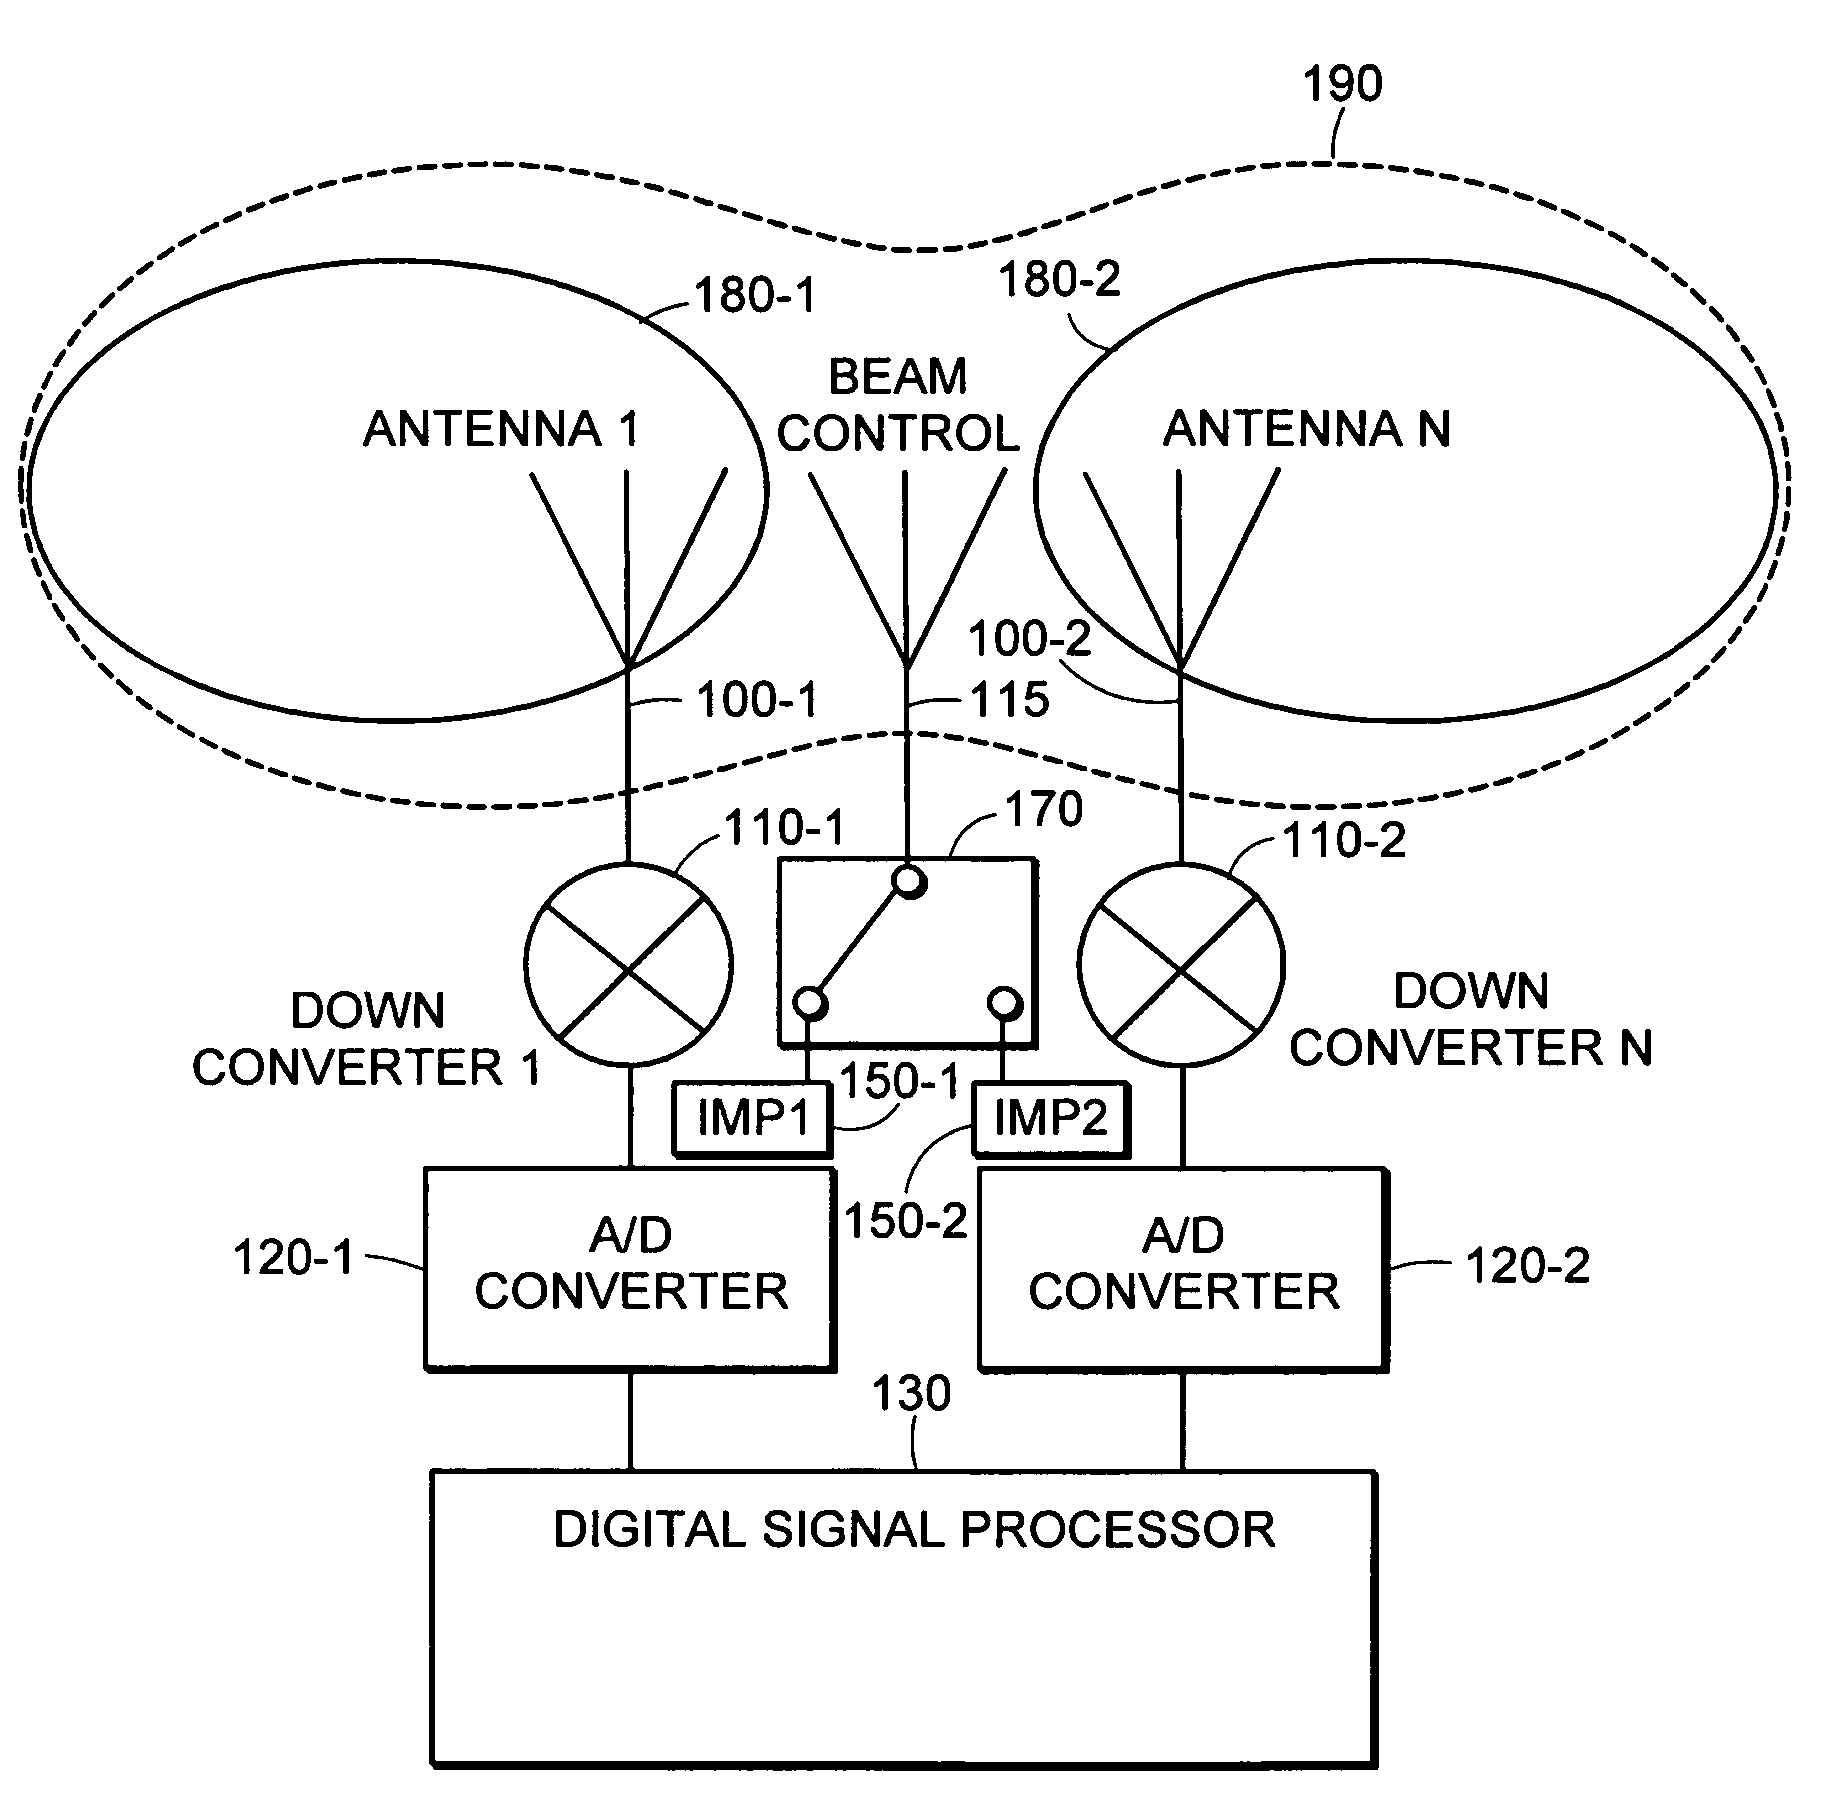 Low cost multiple pattern antenna for use with multiple receiver systems